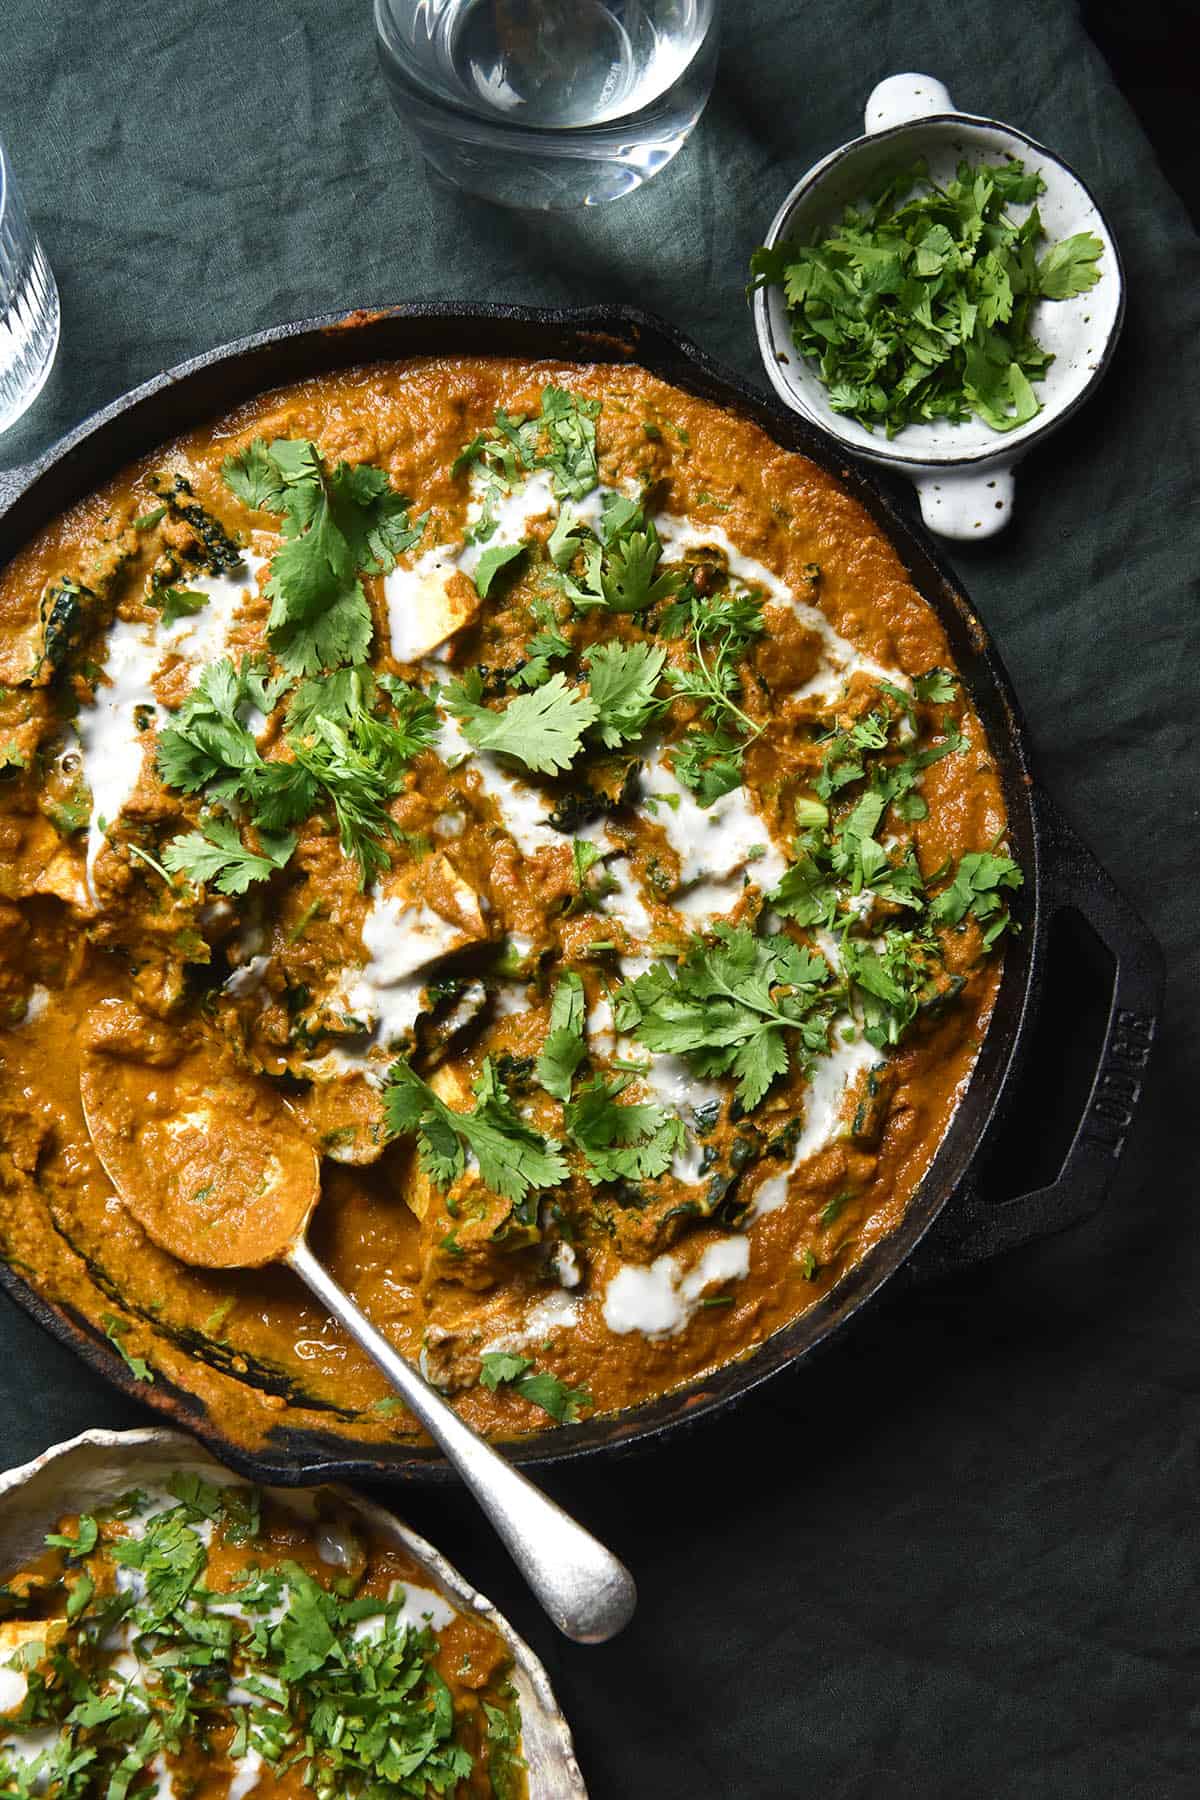 An aerial view of a cast iron skillet filled with SIBO friendly vegan curry. The curry is topped with a drizzle of coconut cream and plenty of coriander. The skillet sits atop an olive green tablecloth and is surrounded by a bowl of curry, water glasses and a pinch bowl with extra coriander